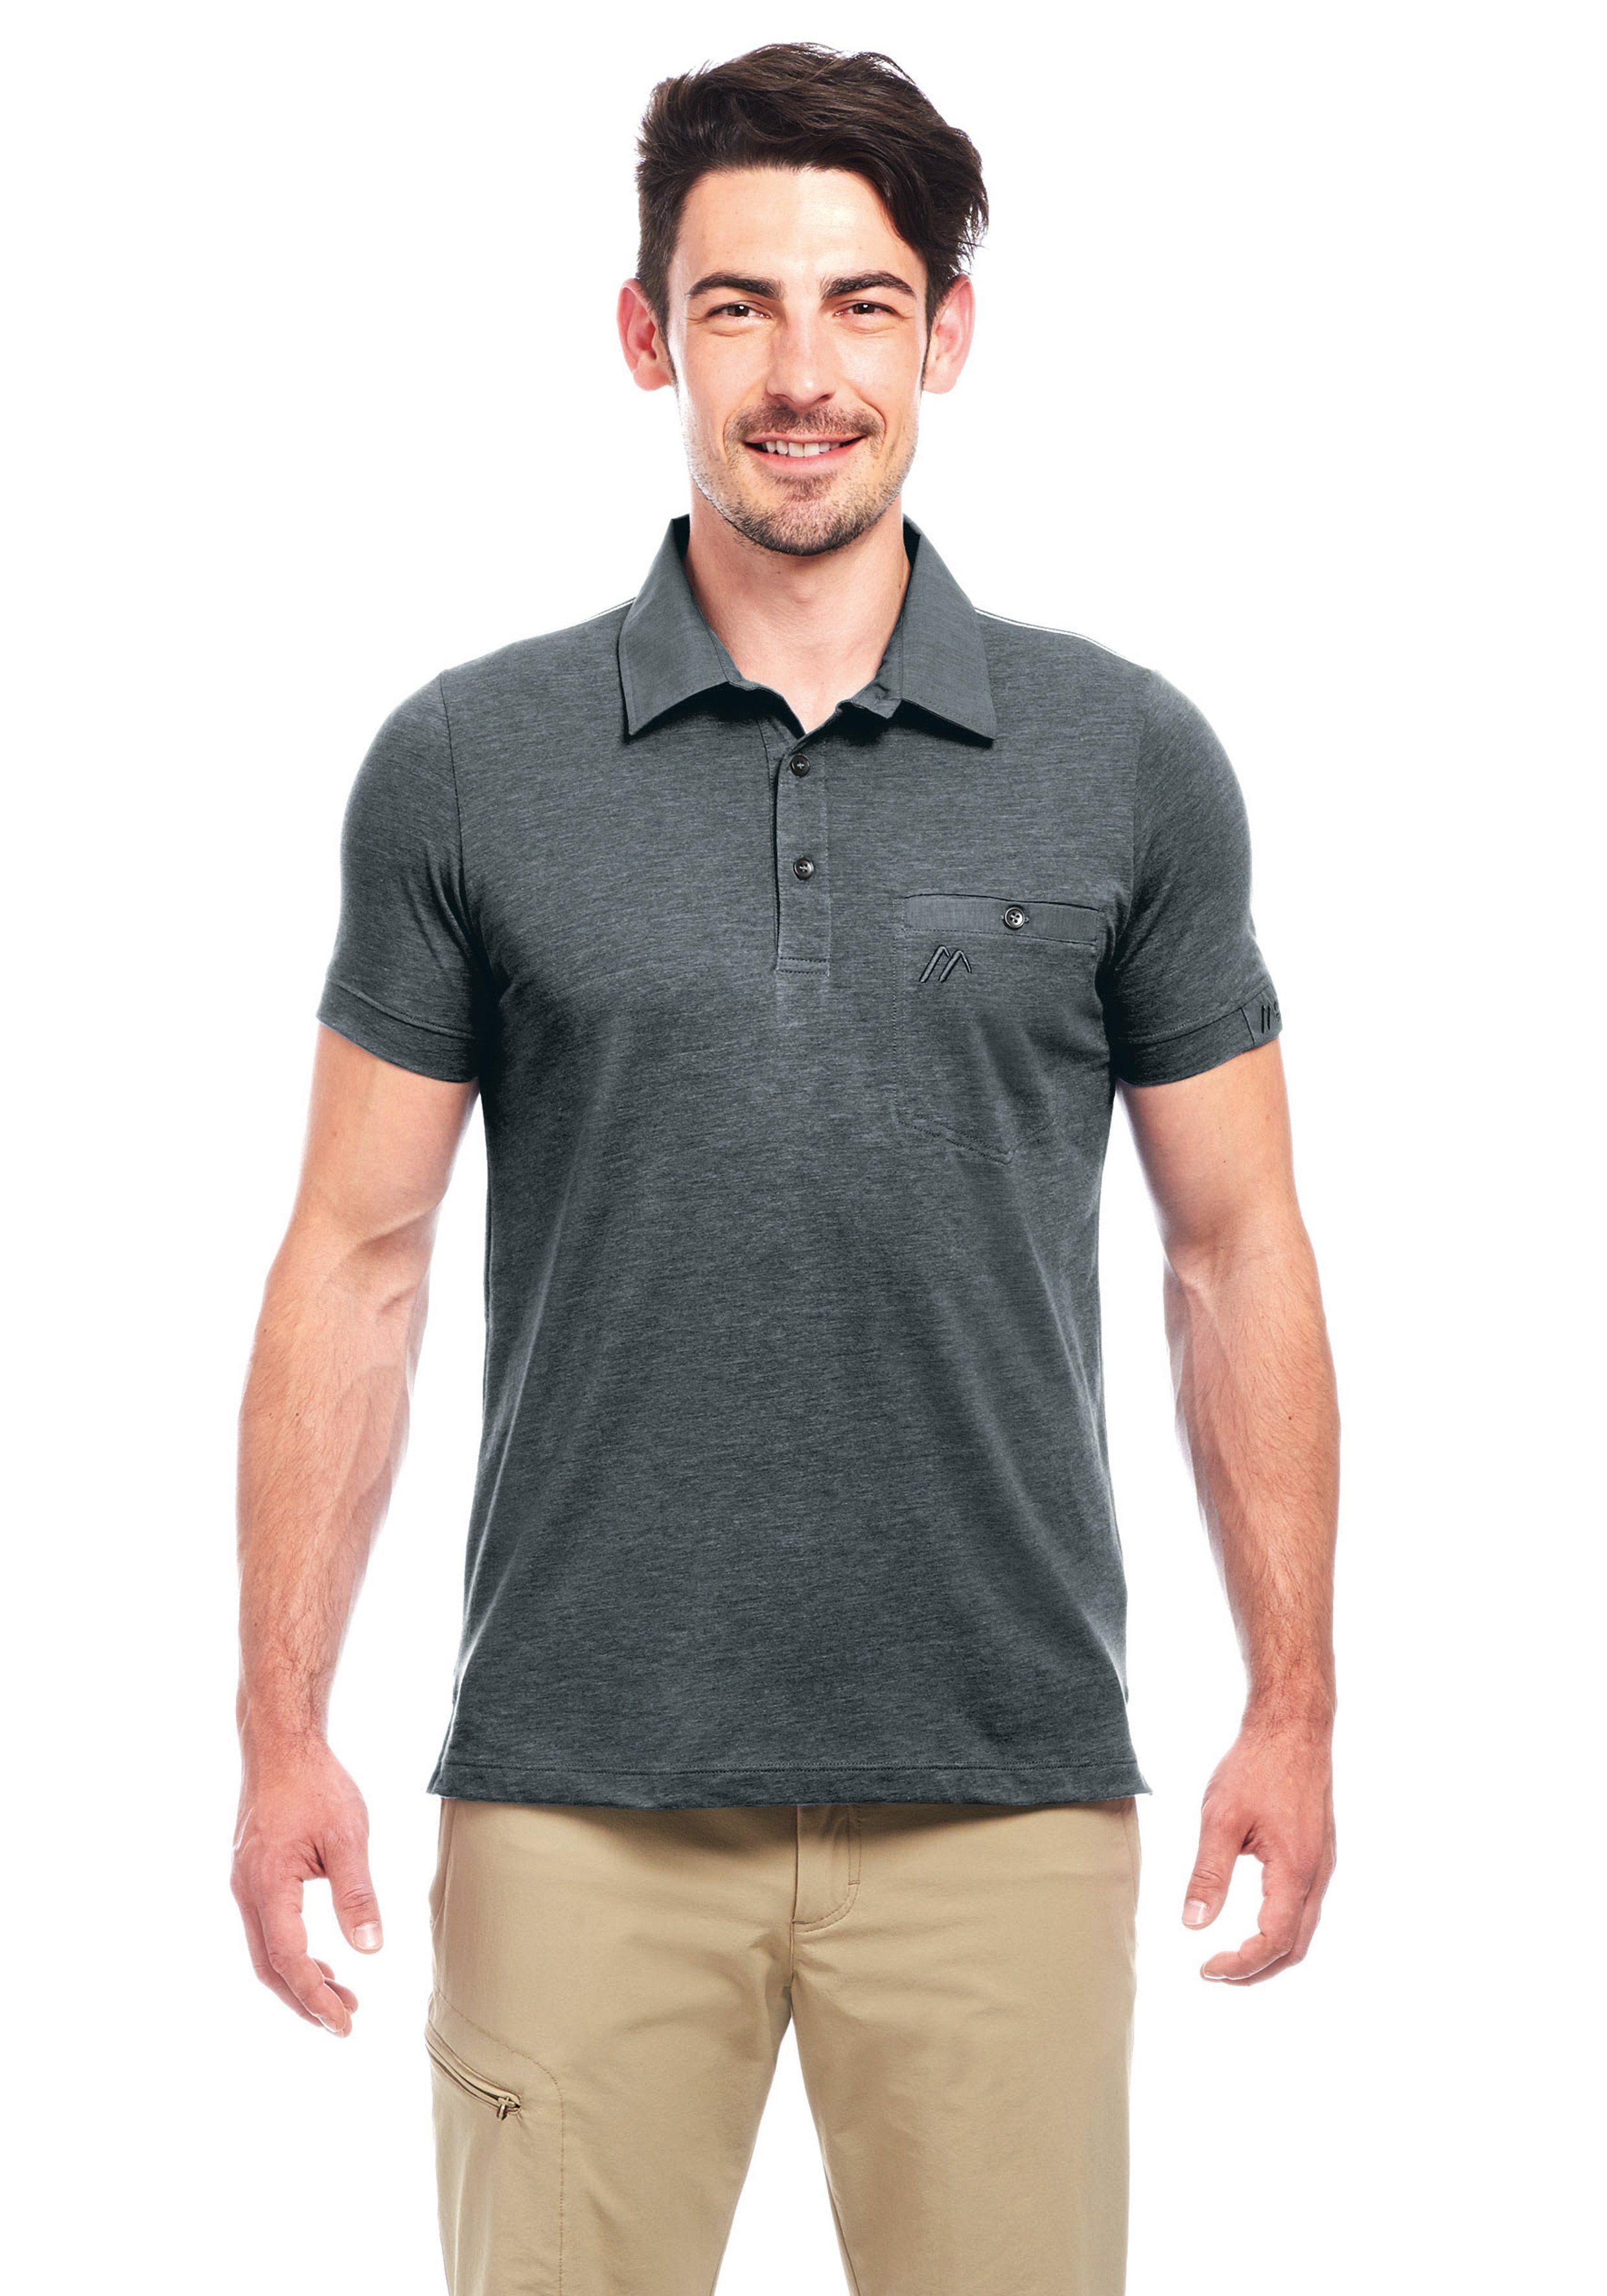 Otto - Maier Sports NU 15% KORTING: Maier Sports functioneel shirt Doolin Polo M